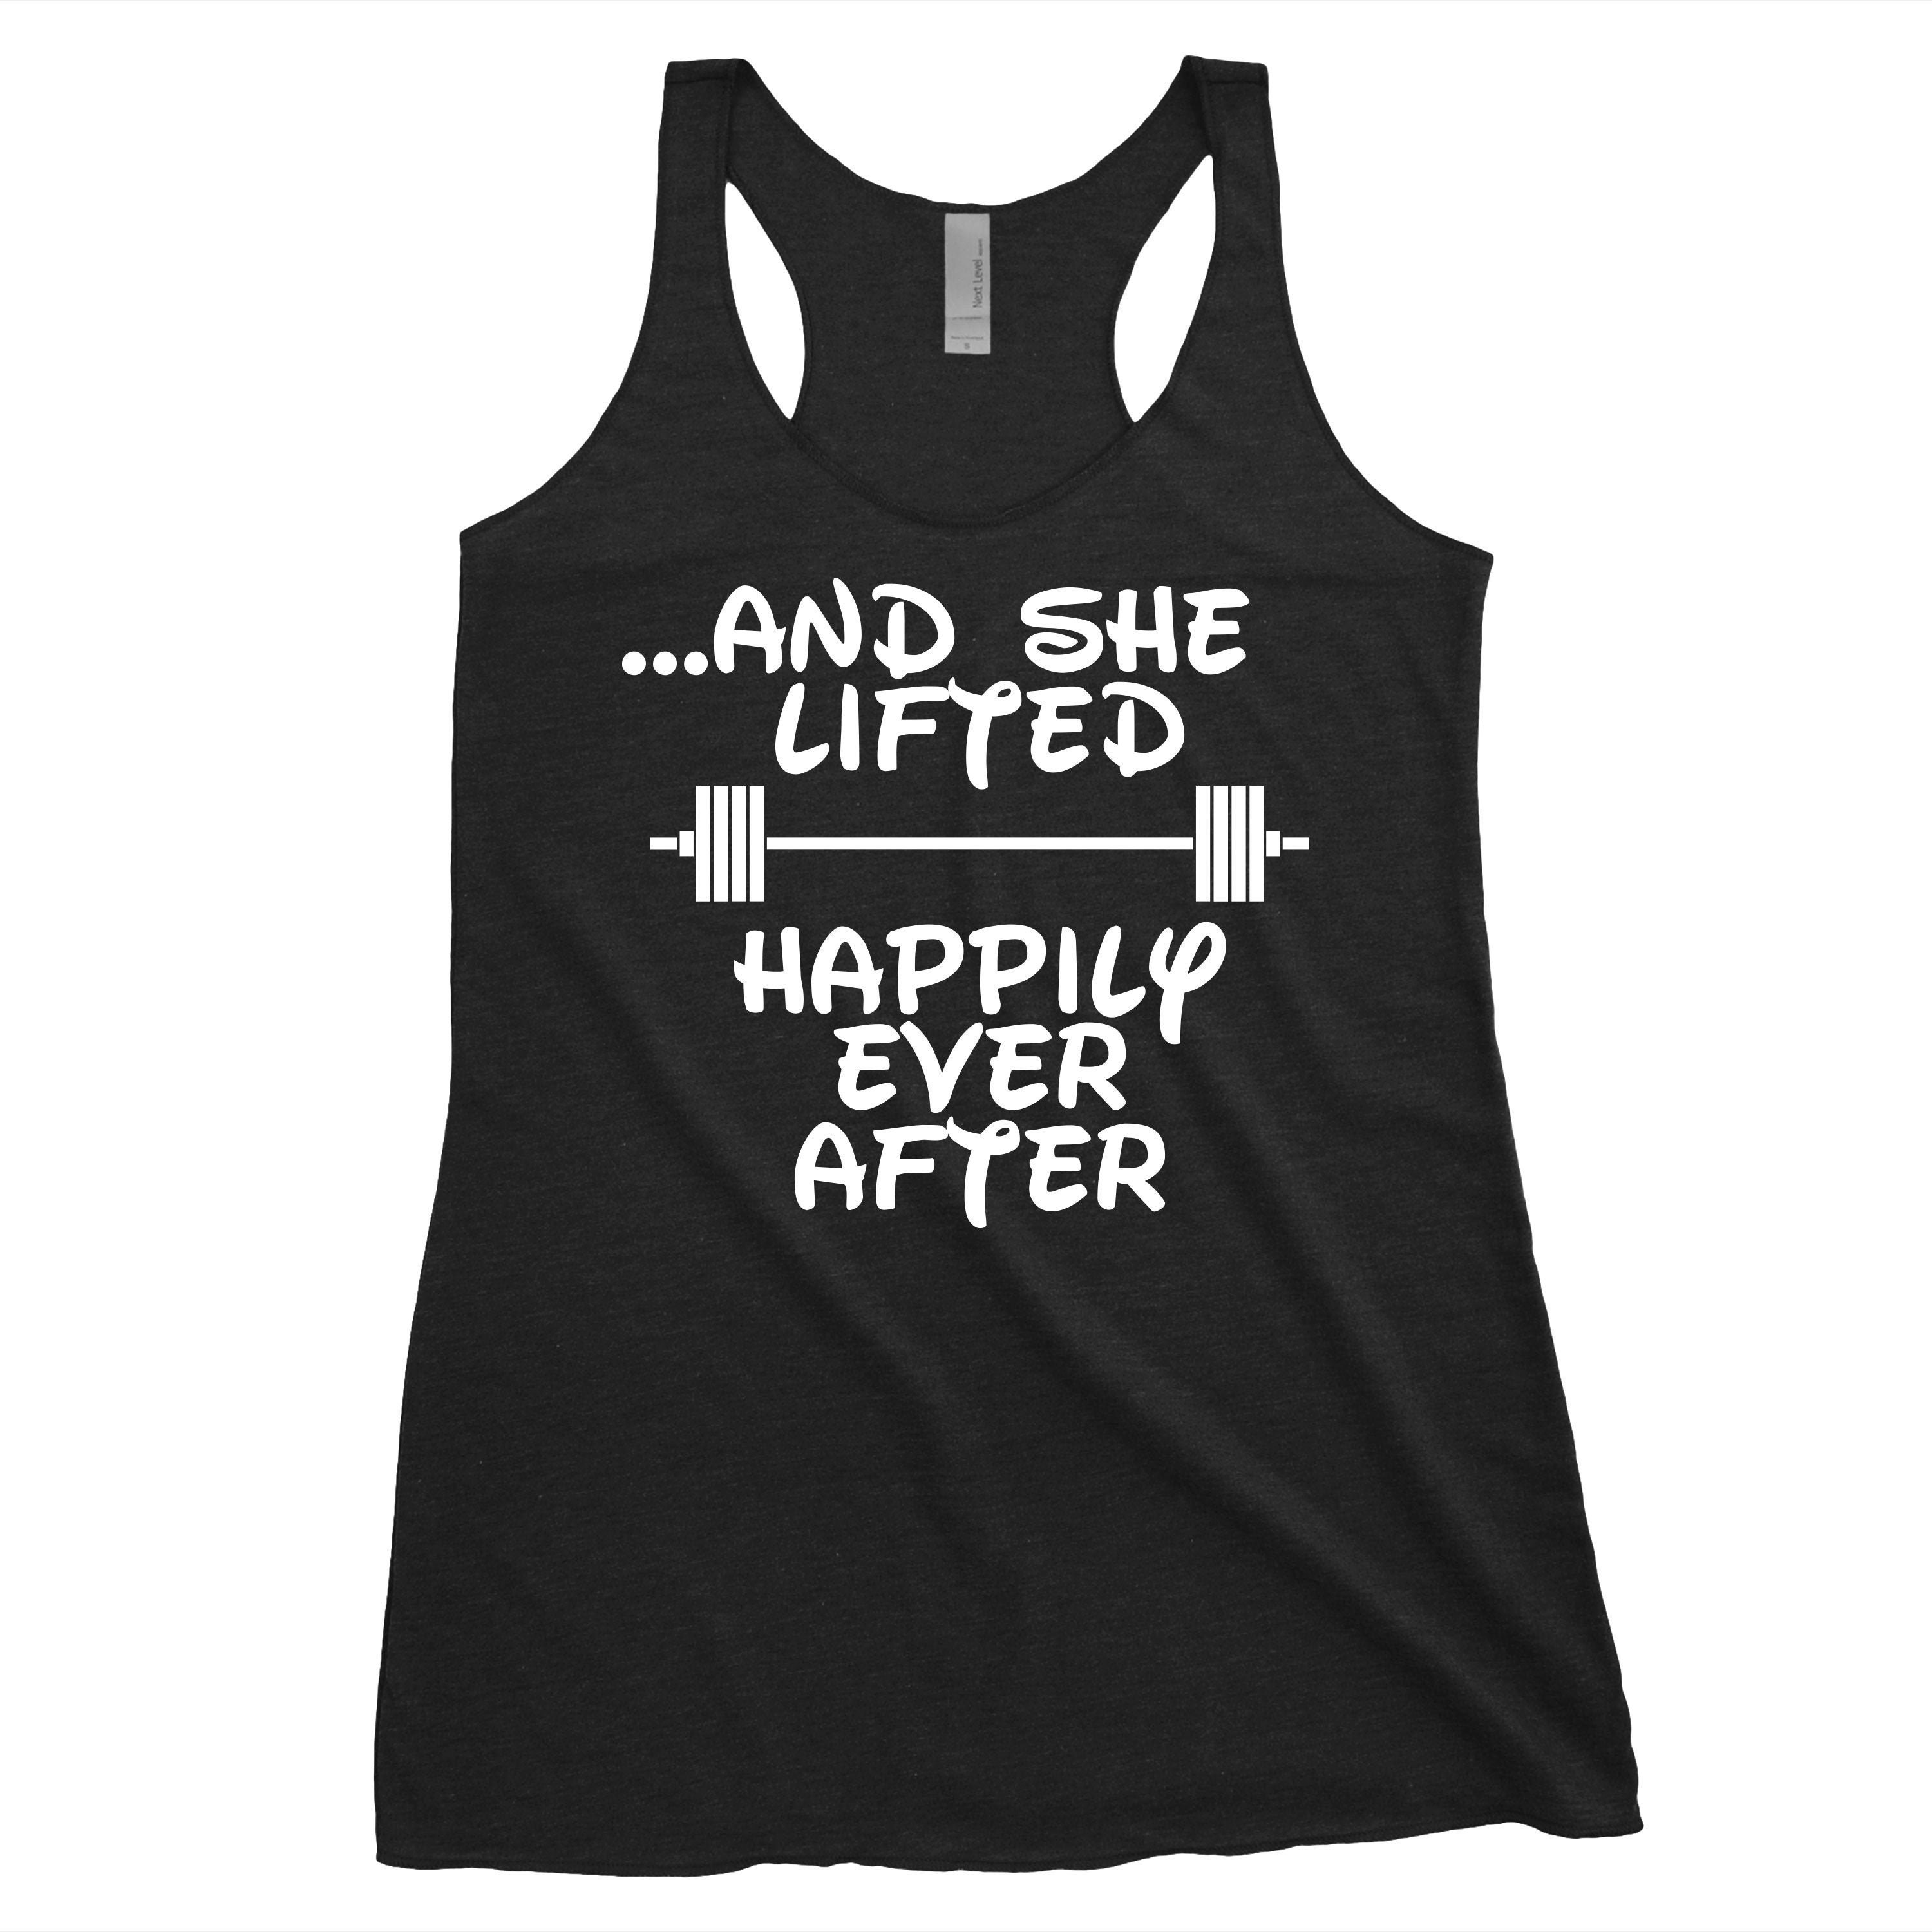 And she lifted happily ever after womens racerback workout | Etsy